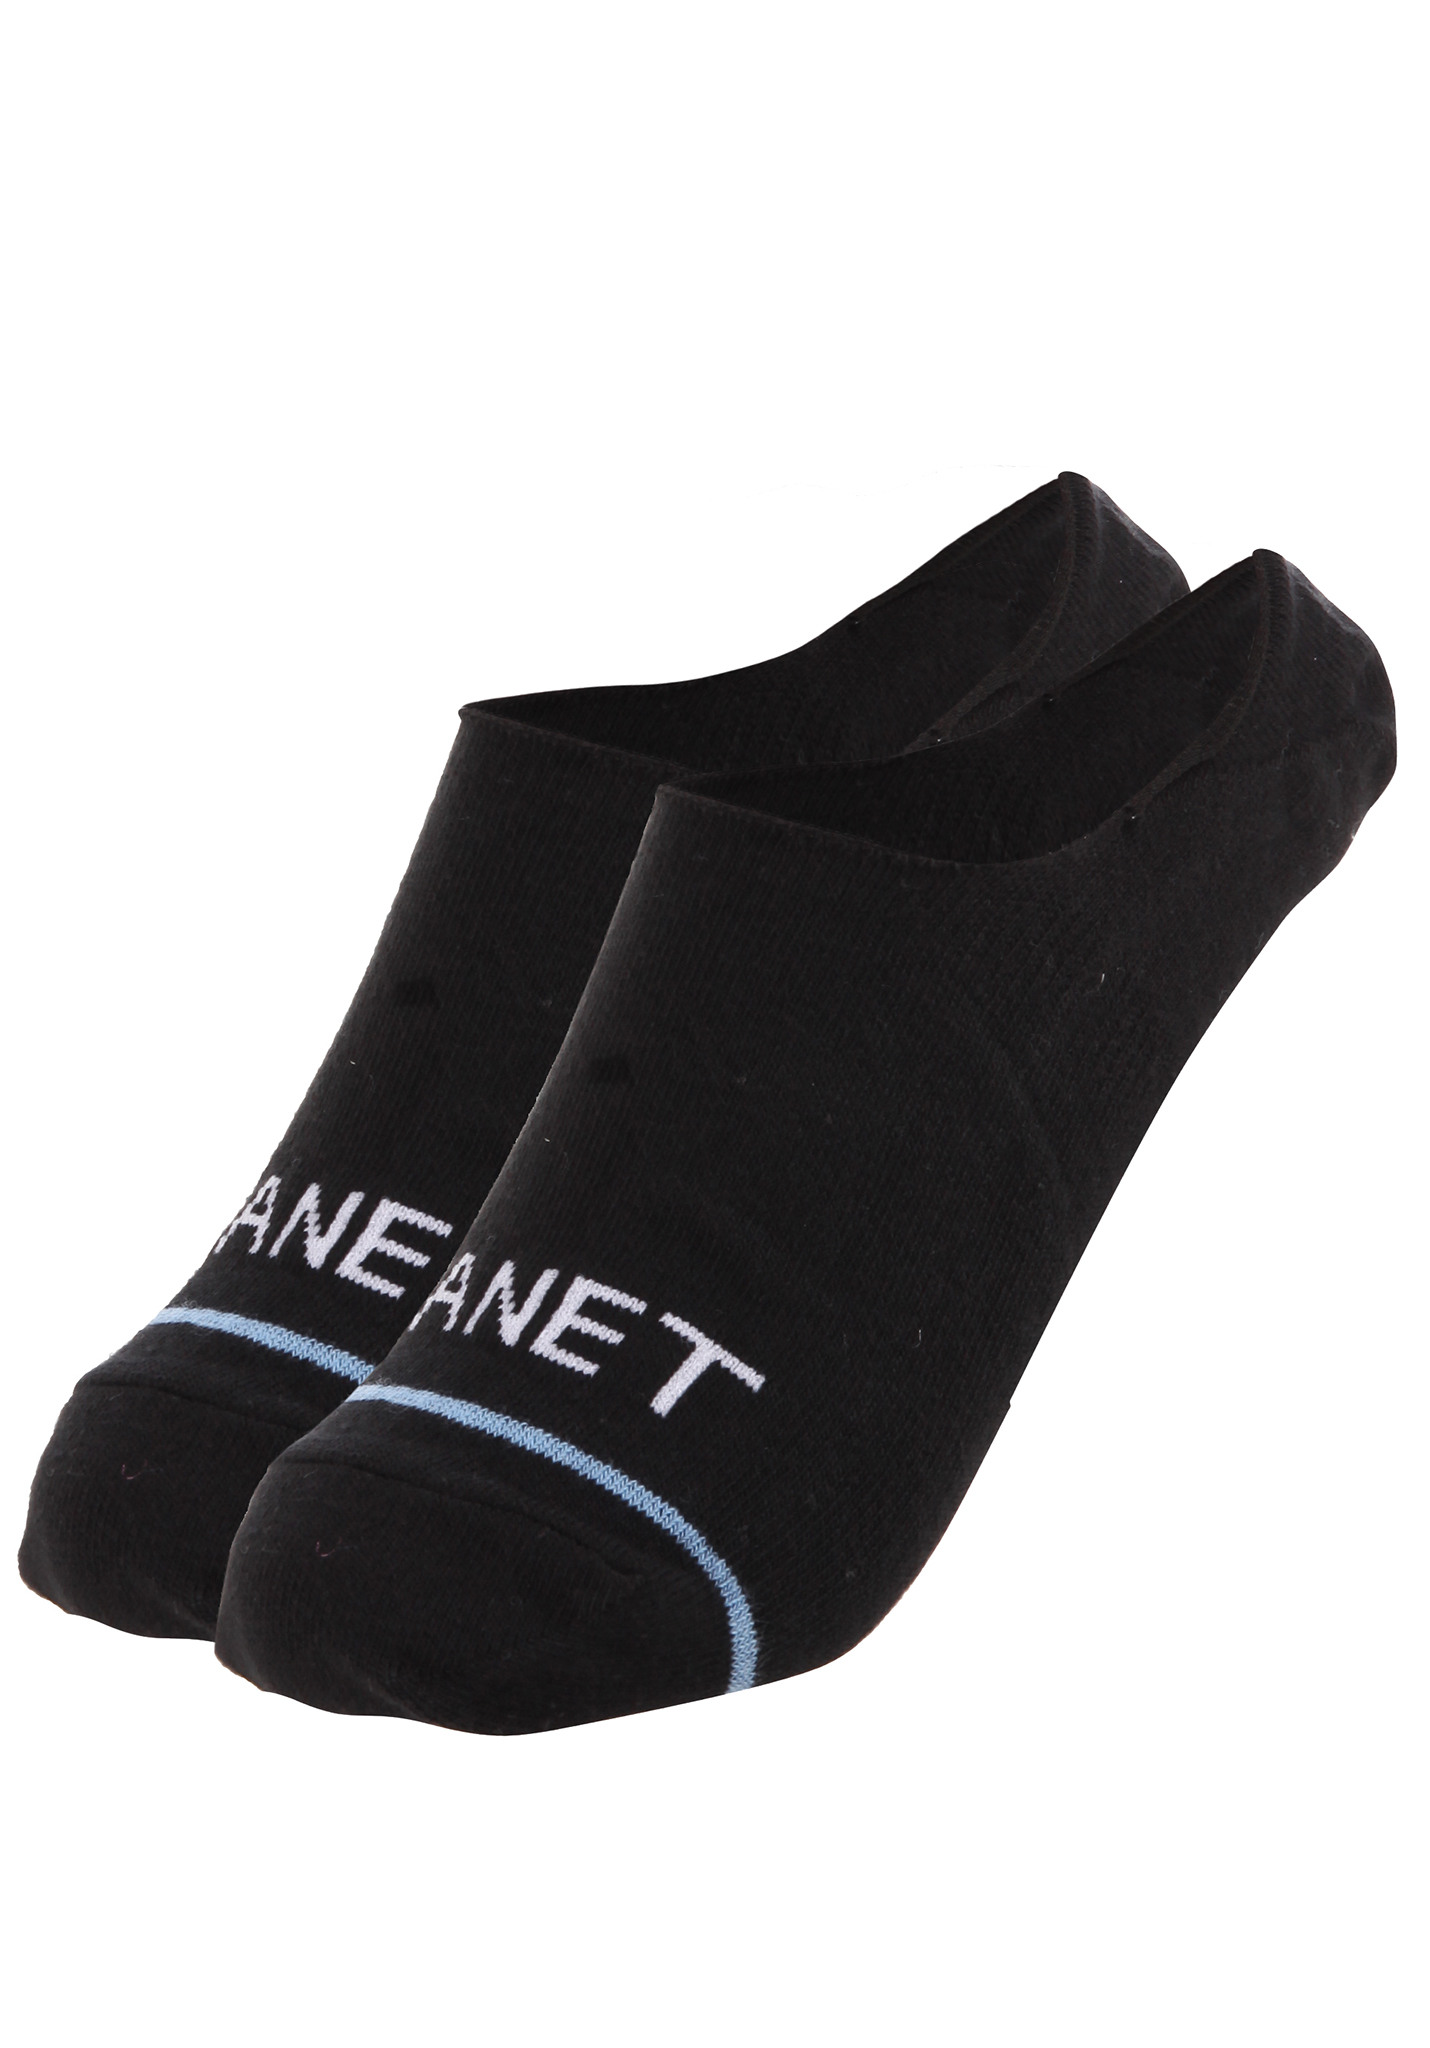 Planet Sports Grip Invisible Double Pack Socken black 43-46